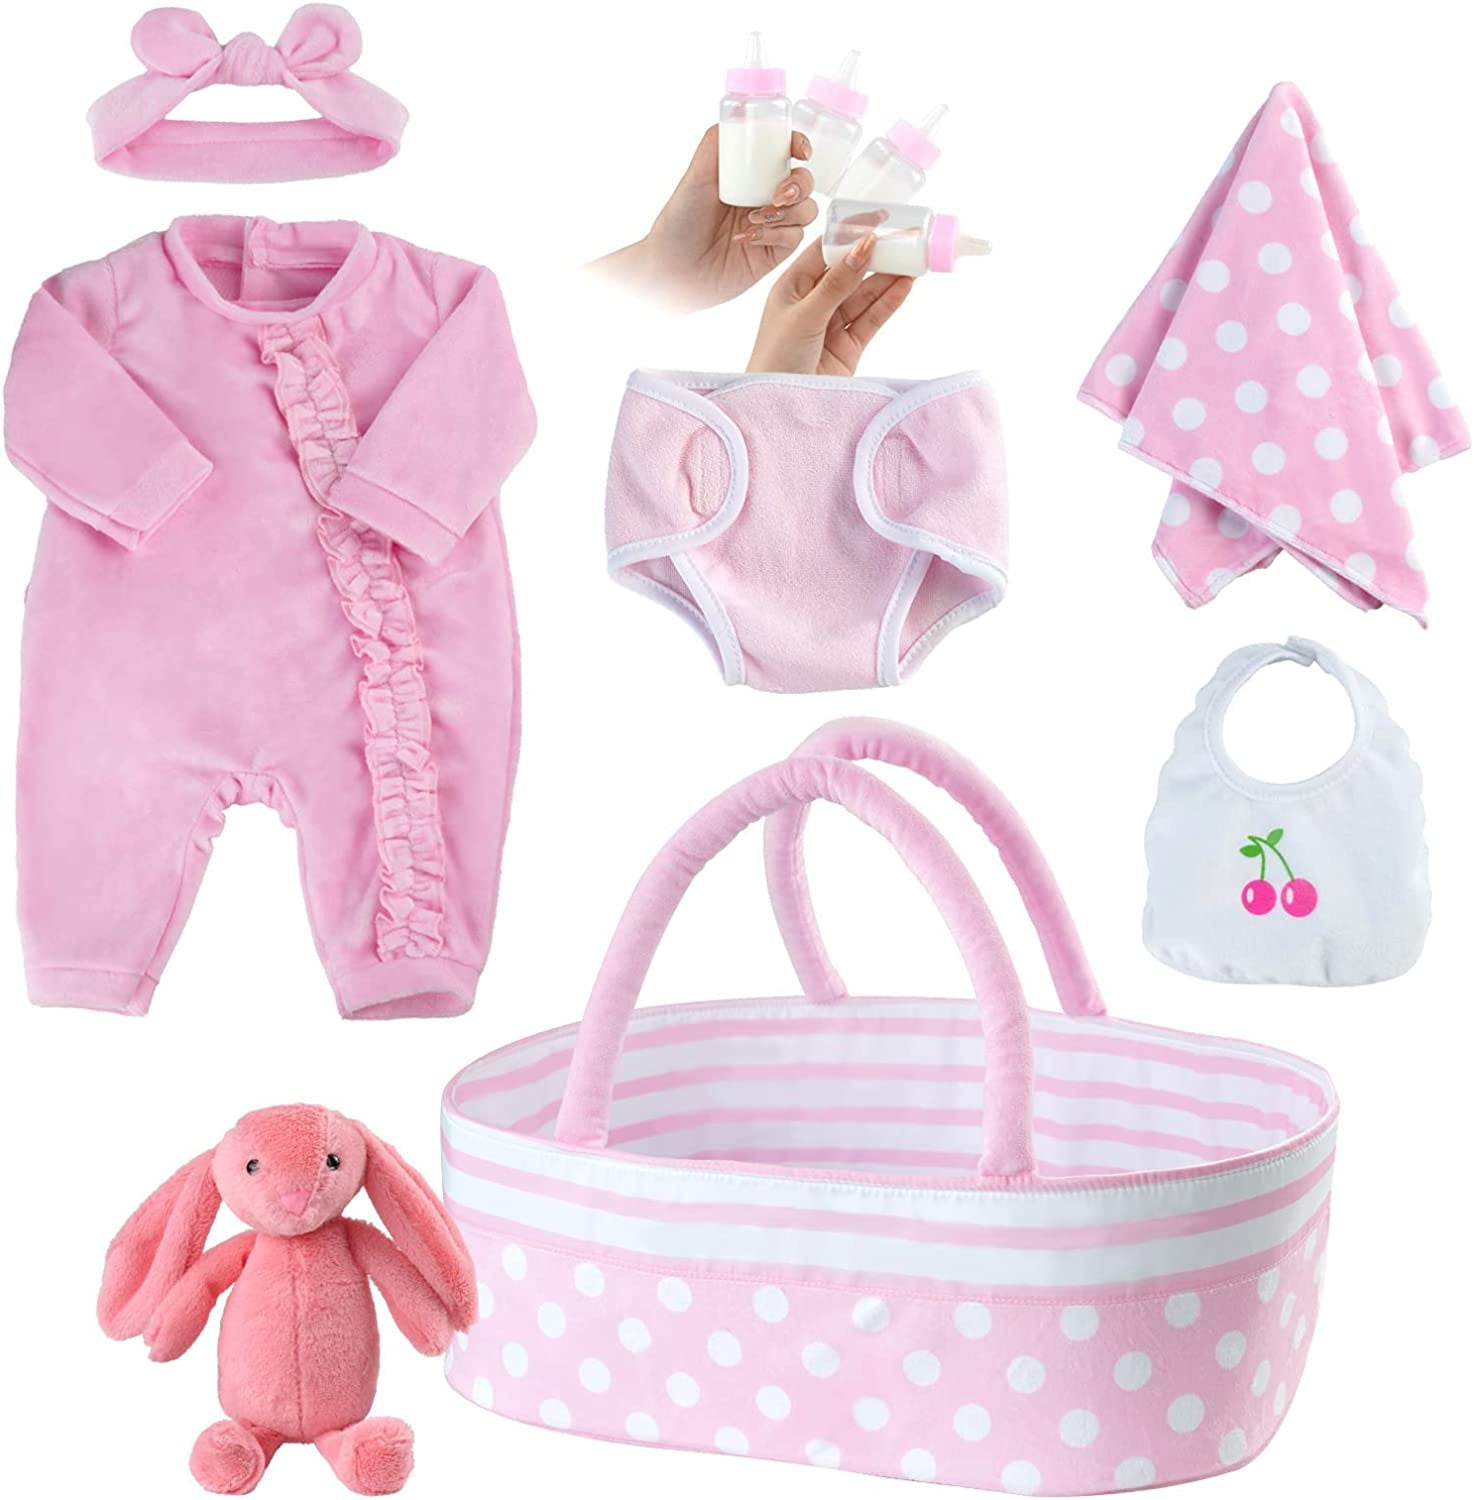 Pink Baby Doll Clothes 4pcs Set Outfit Accessories for 20-22 Inch Newb –  Pinky Reborn